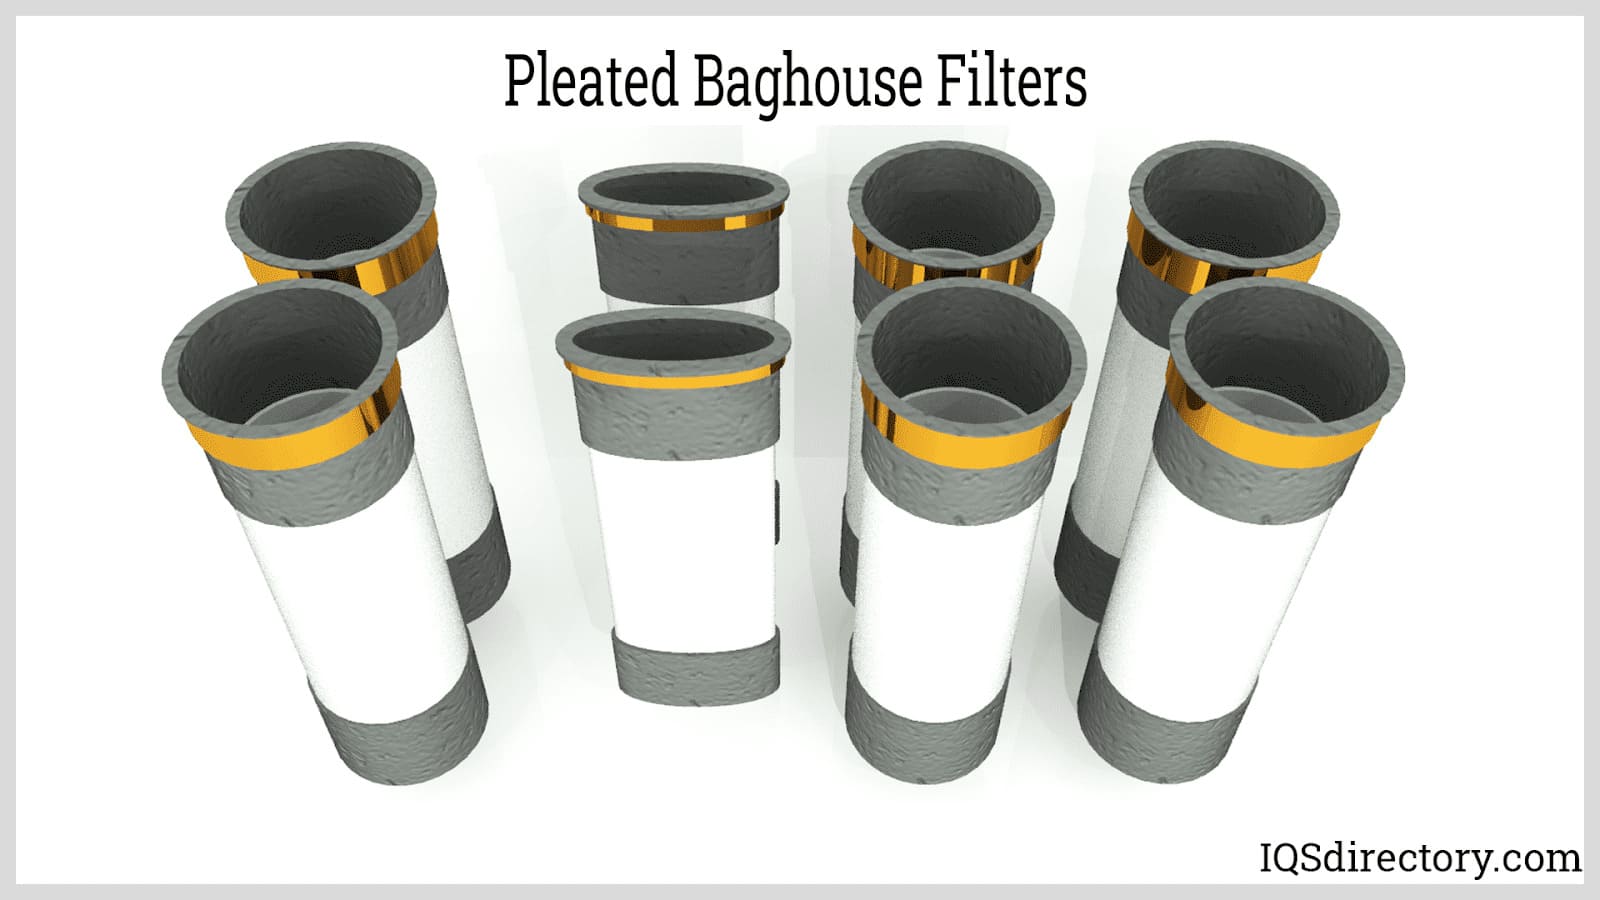 Pleated Baghouse Filters